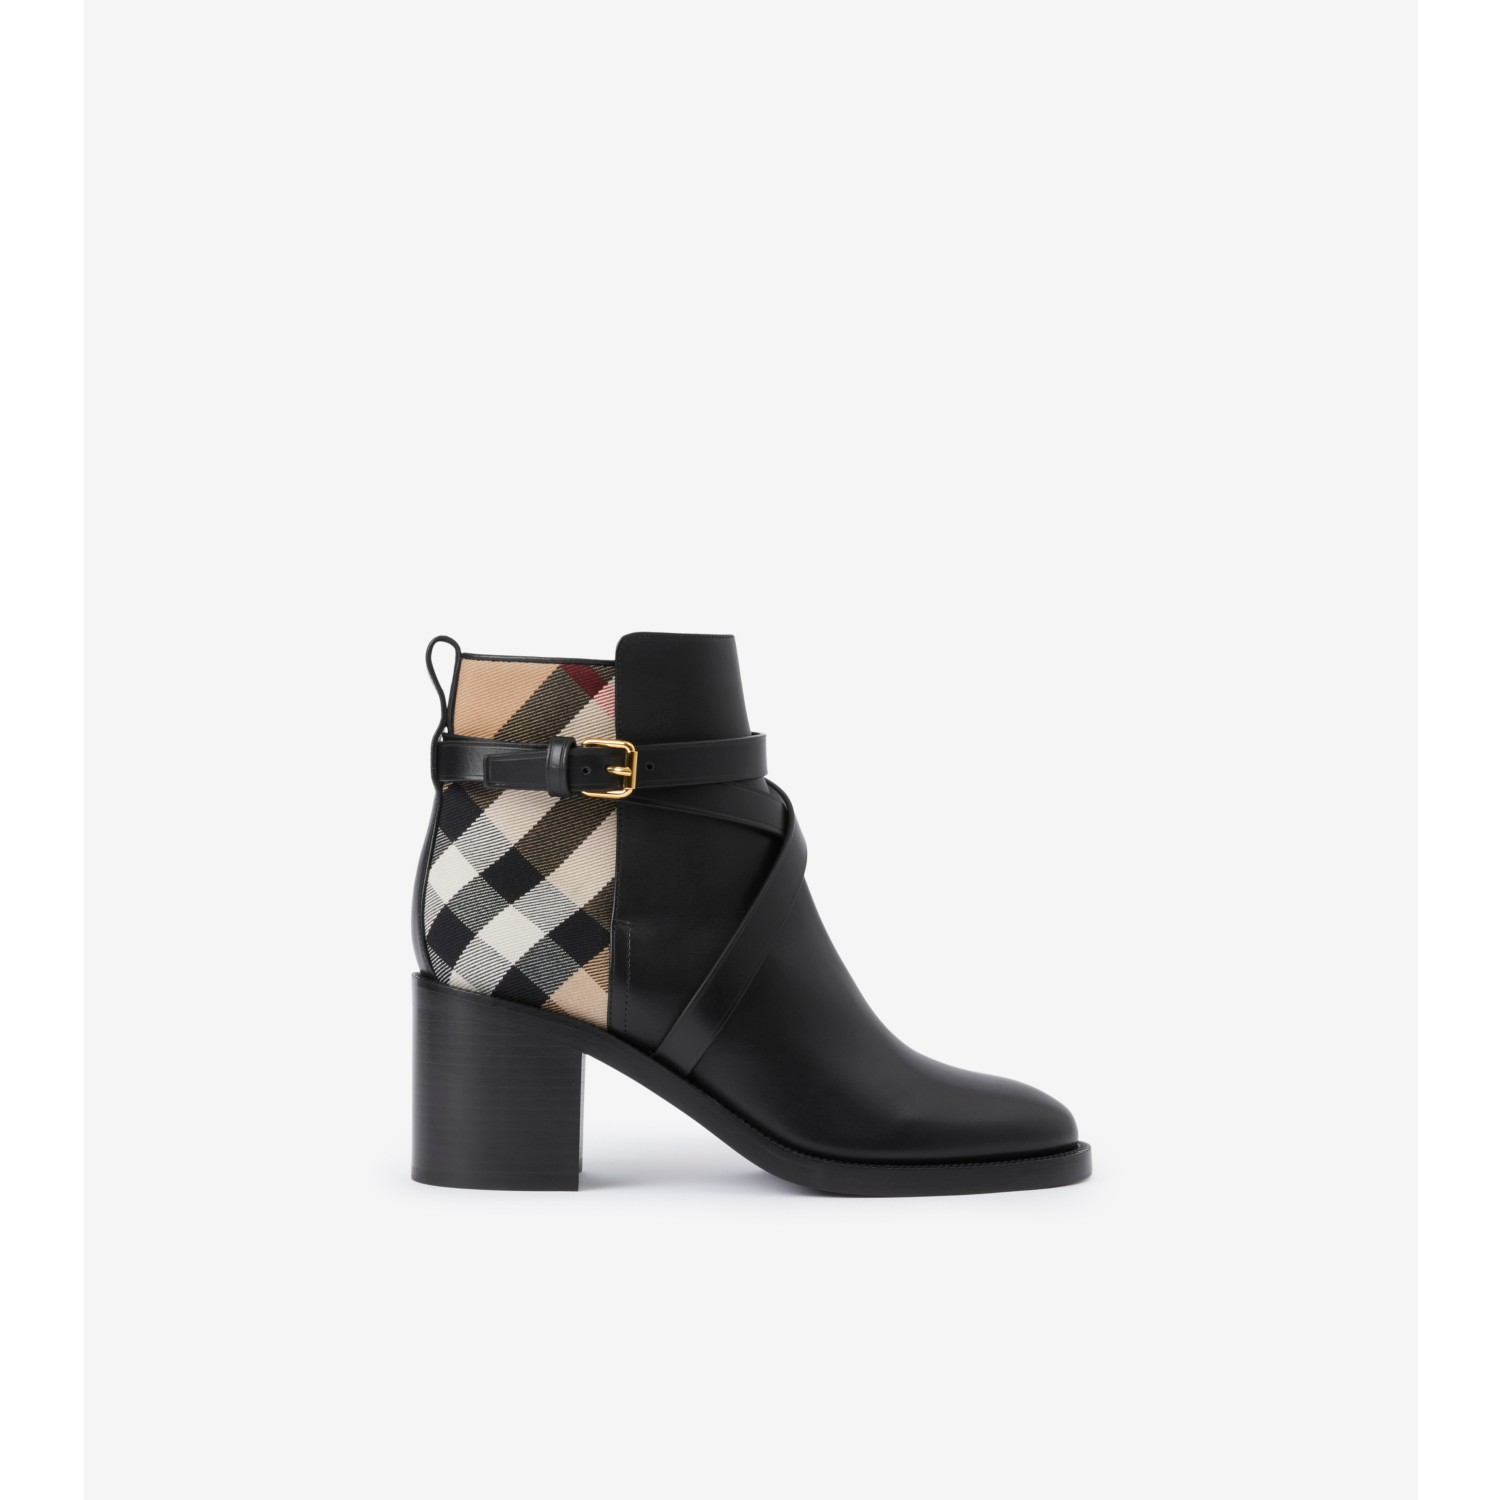 House Check and Leather Ankle Boots in Black/archive beige